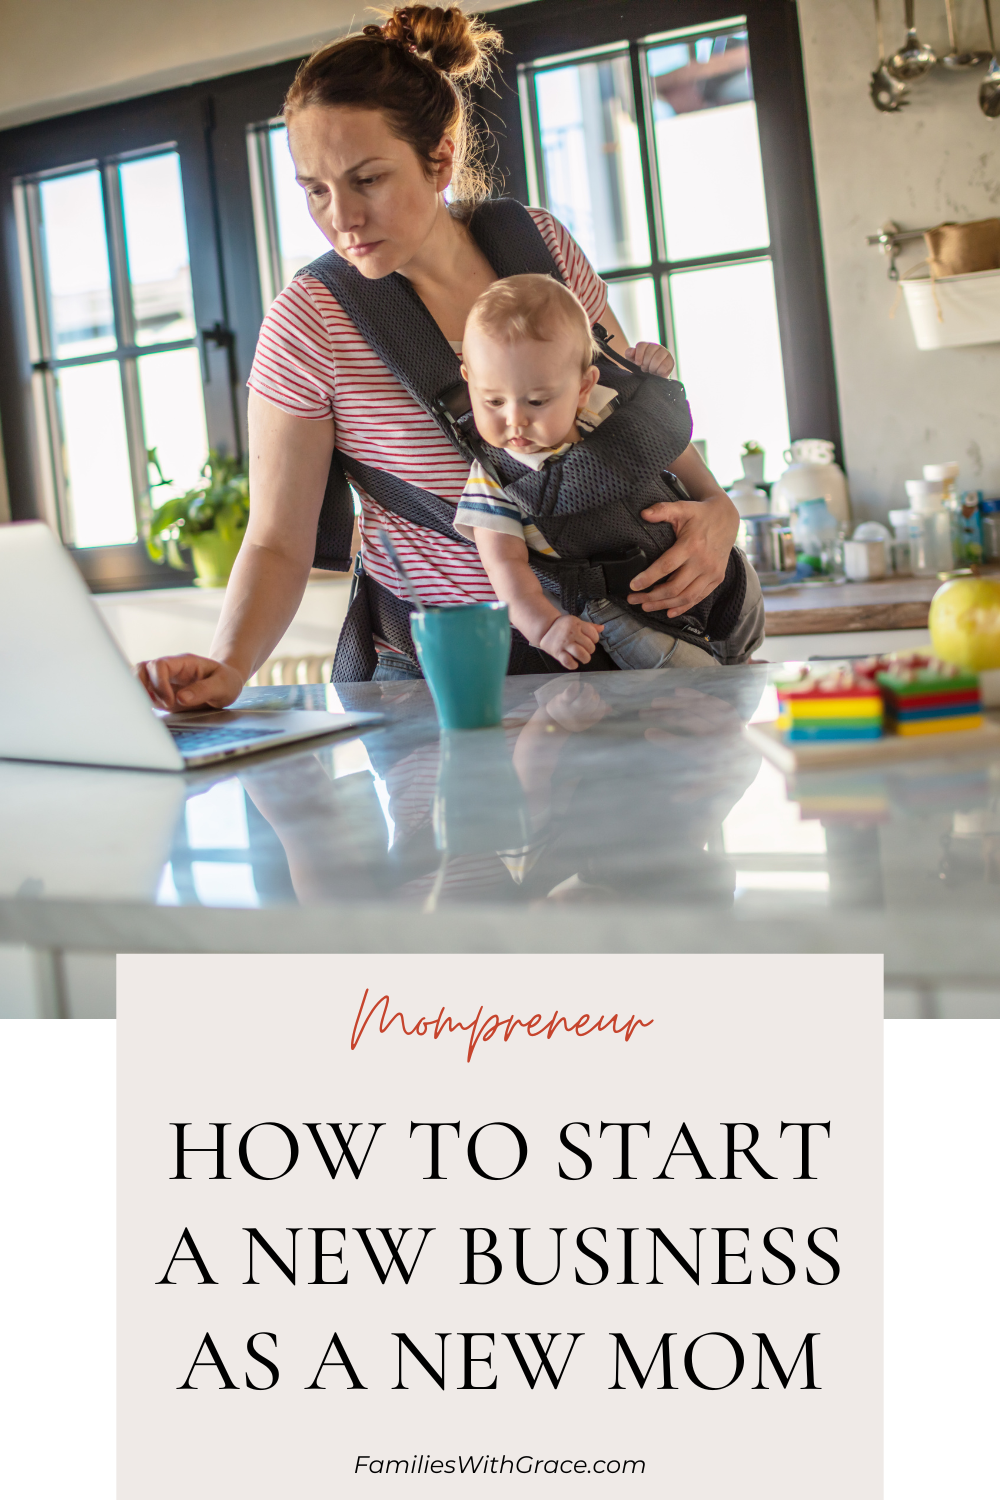 How to start a new business as a new mom